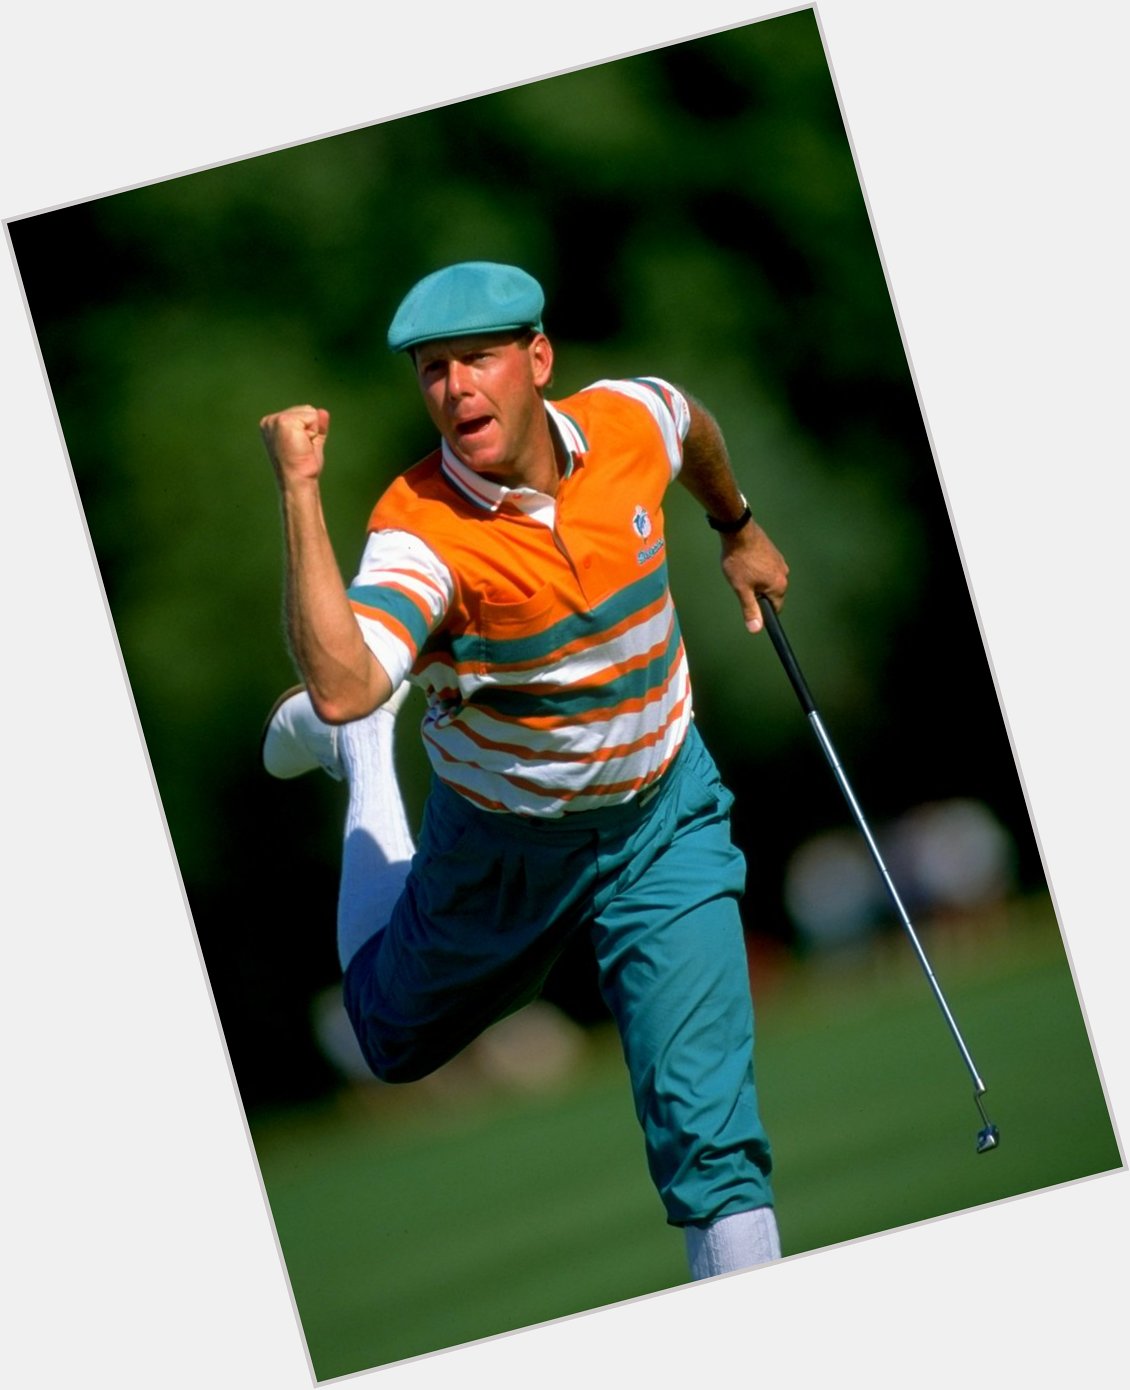 Happy Birthday to Payne Stewart! He would have been 61 today! You are missed, Payne! : 